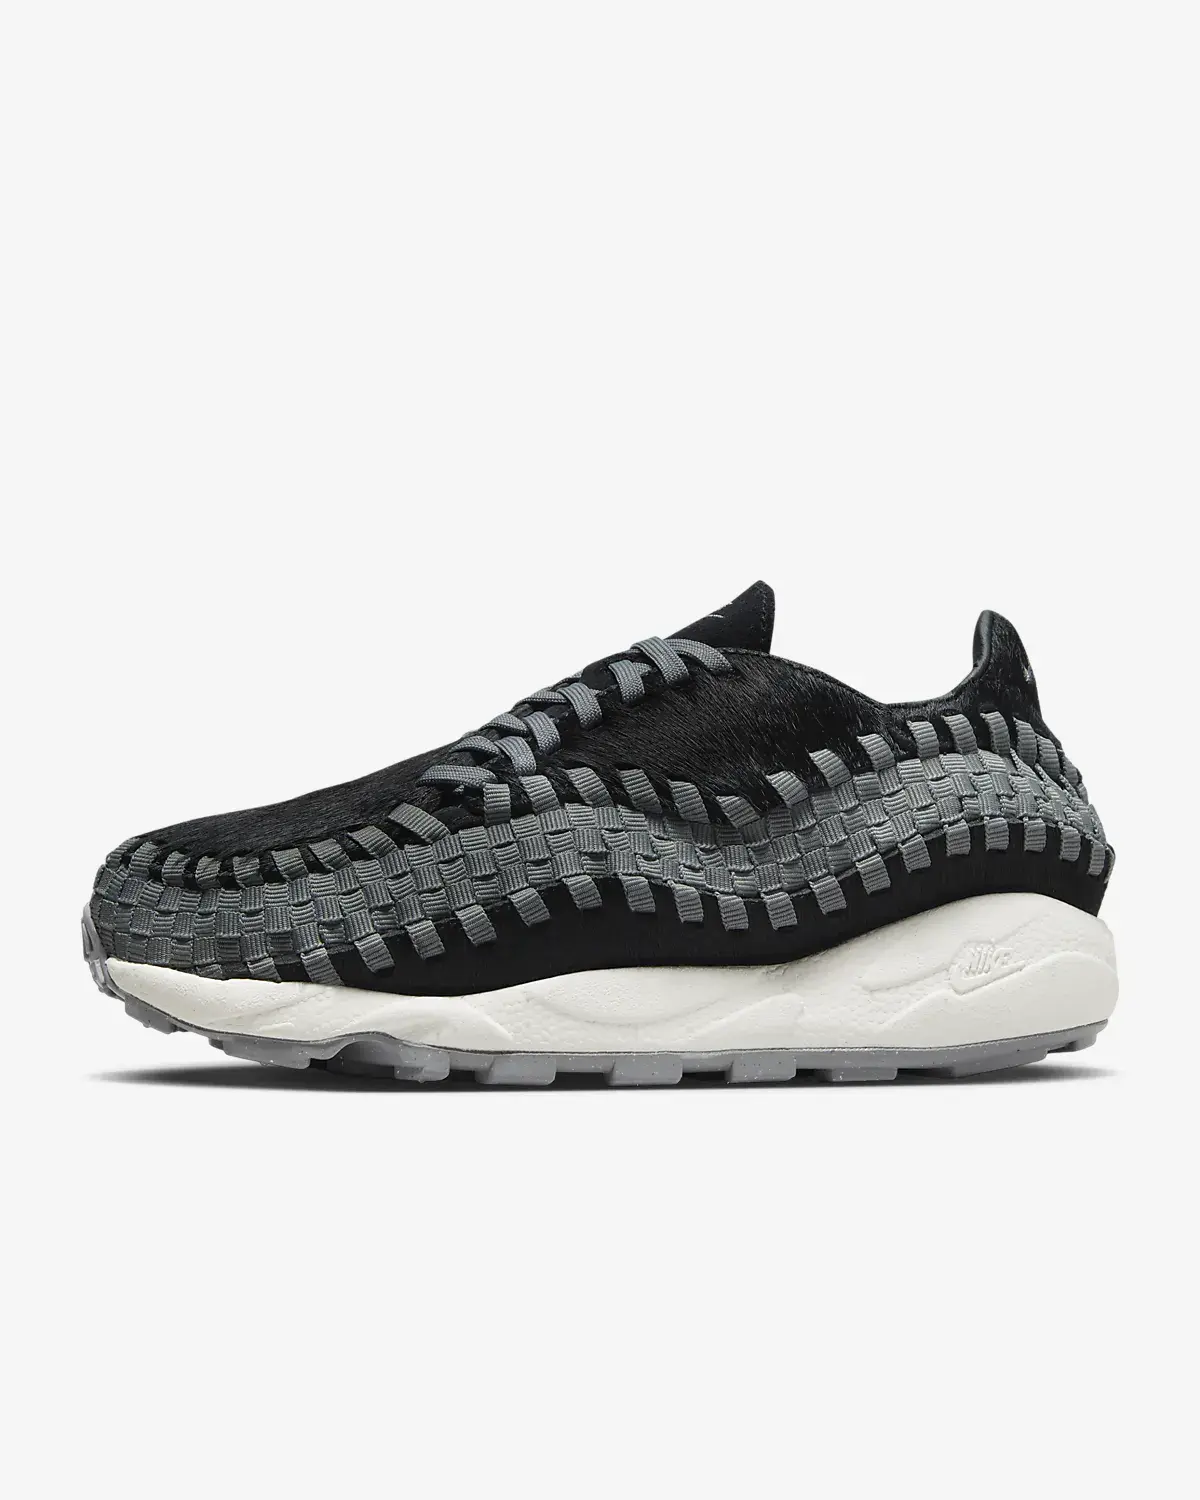 Nike Air Footscape Woven. 1